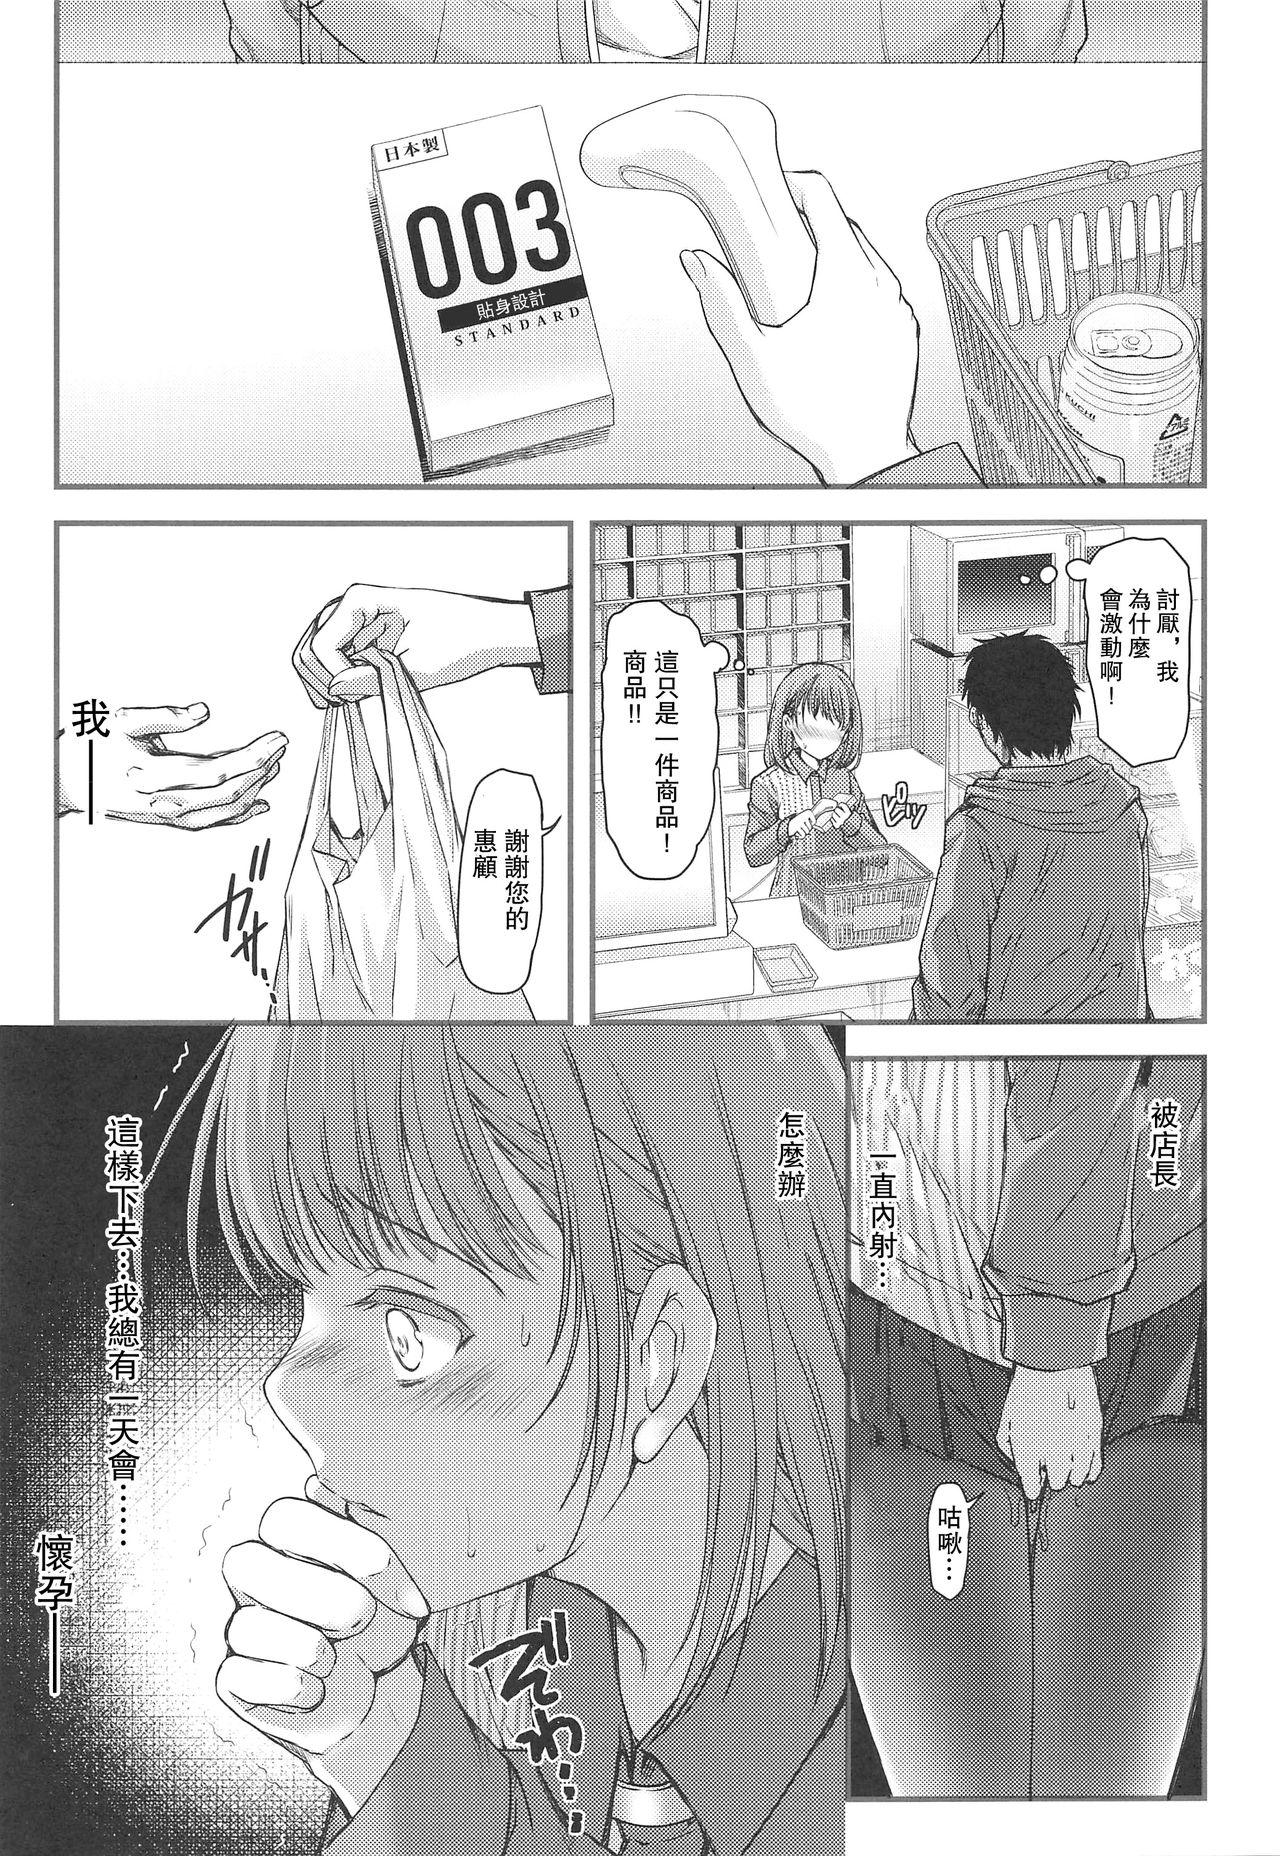 With Sayonara, every3 - Love plus Fetiche - Page 11